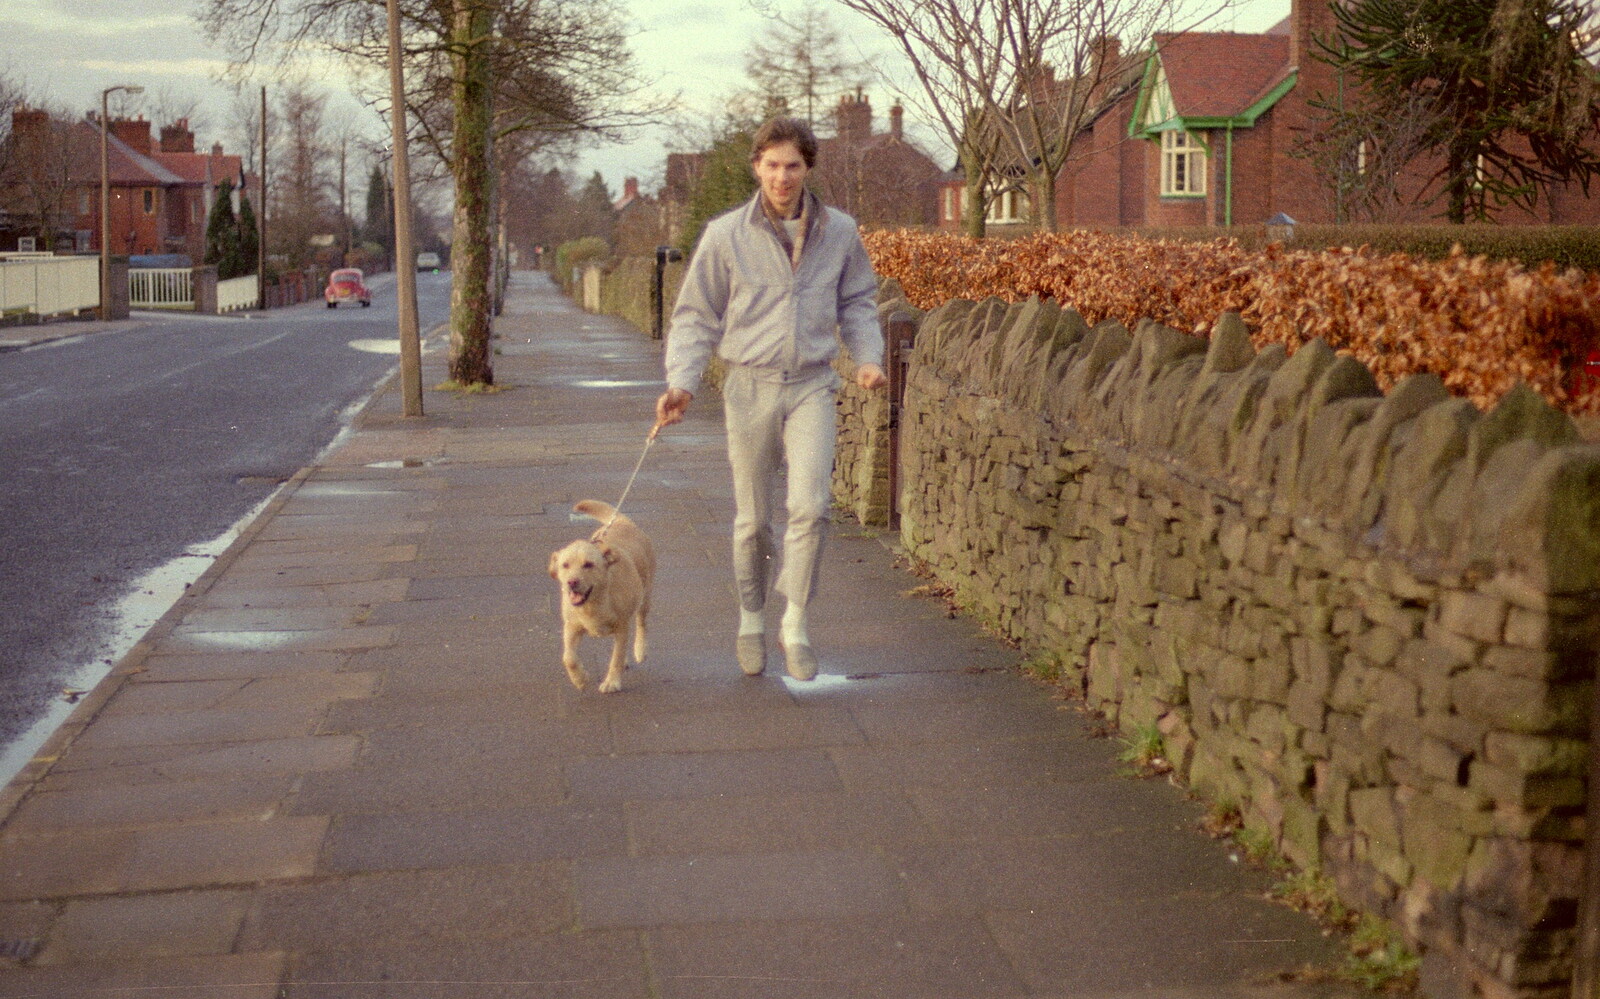 Sean runs down Ryles Park Avenue from Easter With Sean in Macclesfield, Cheshire - 6th April 1986